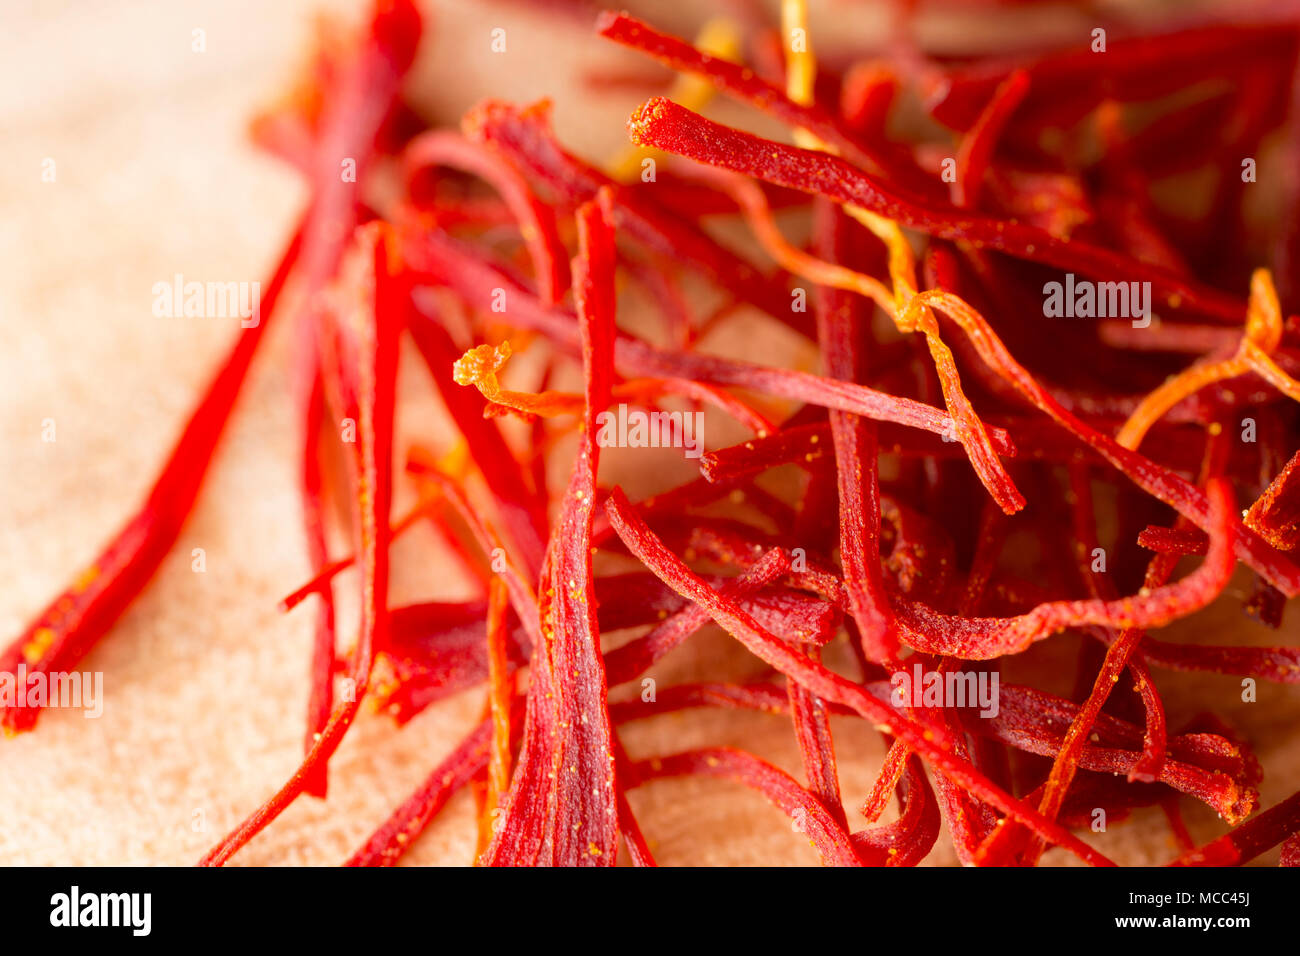 Saffron threads bought from a supermarket in the UK. Saffron is the stigmas and styles of the saffron crocus Crocus sativus, and is an expensive spice Stock Photo